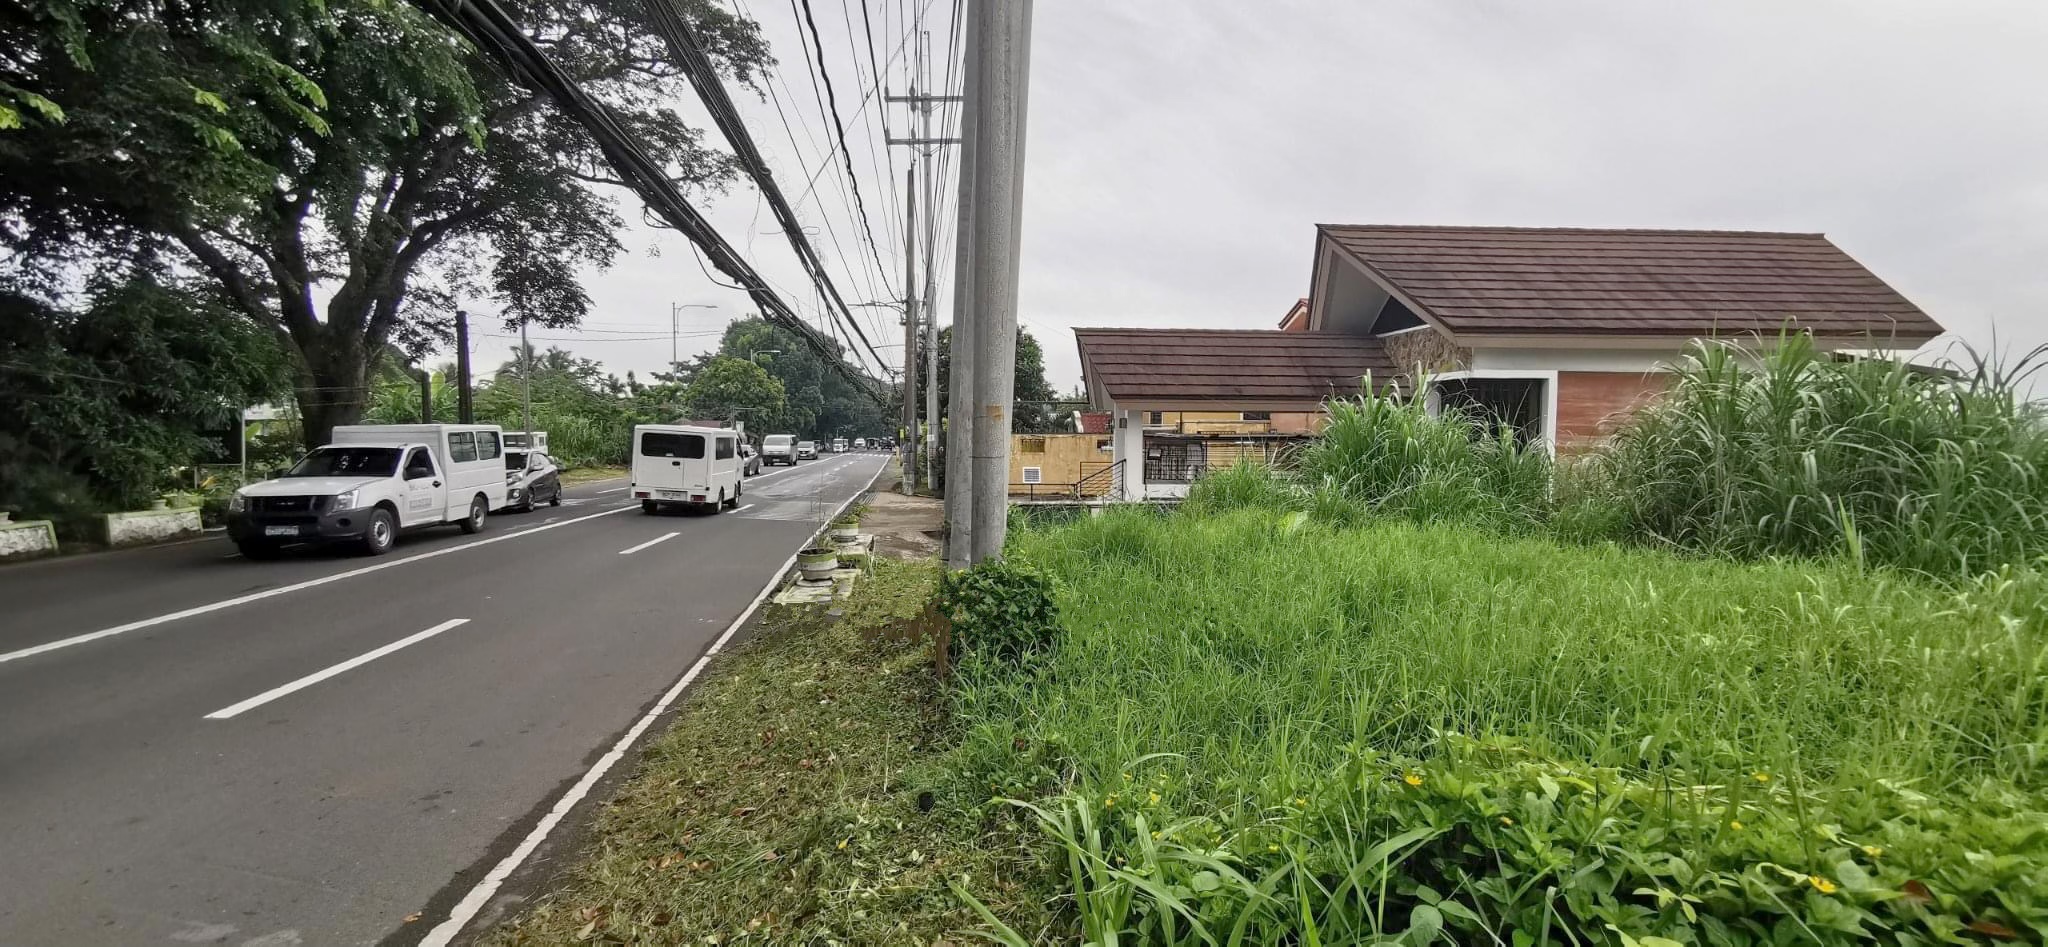 Tagaytay Calamba Road – Prime Commercial Lot for Sale‼️